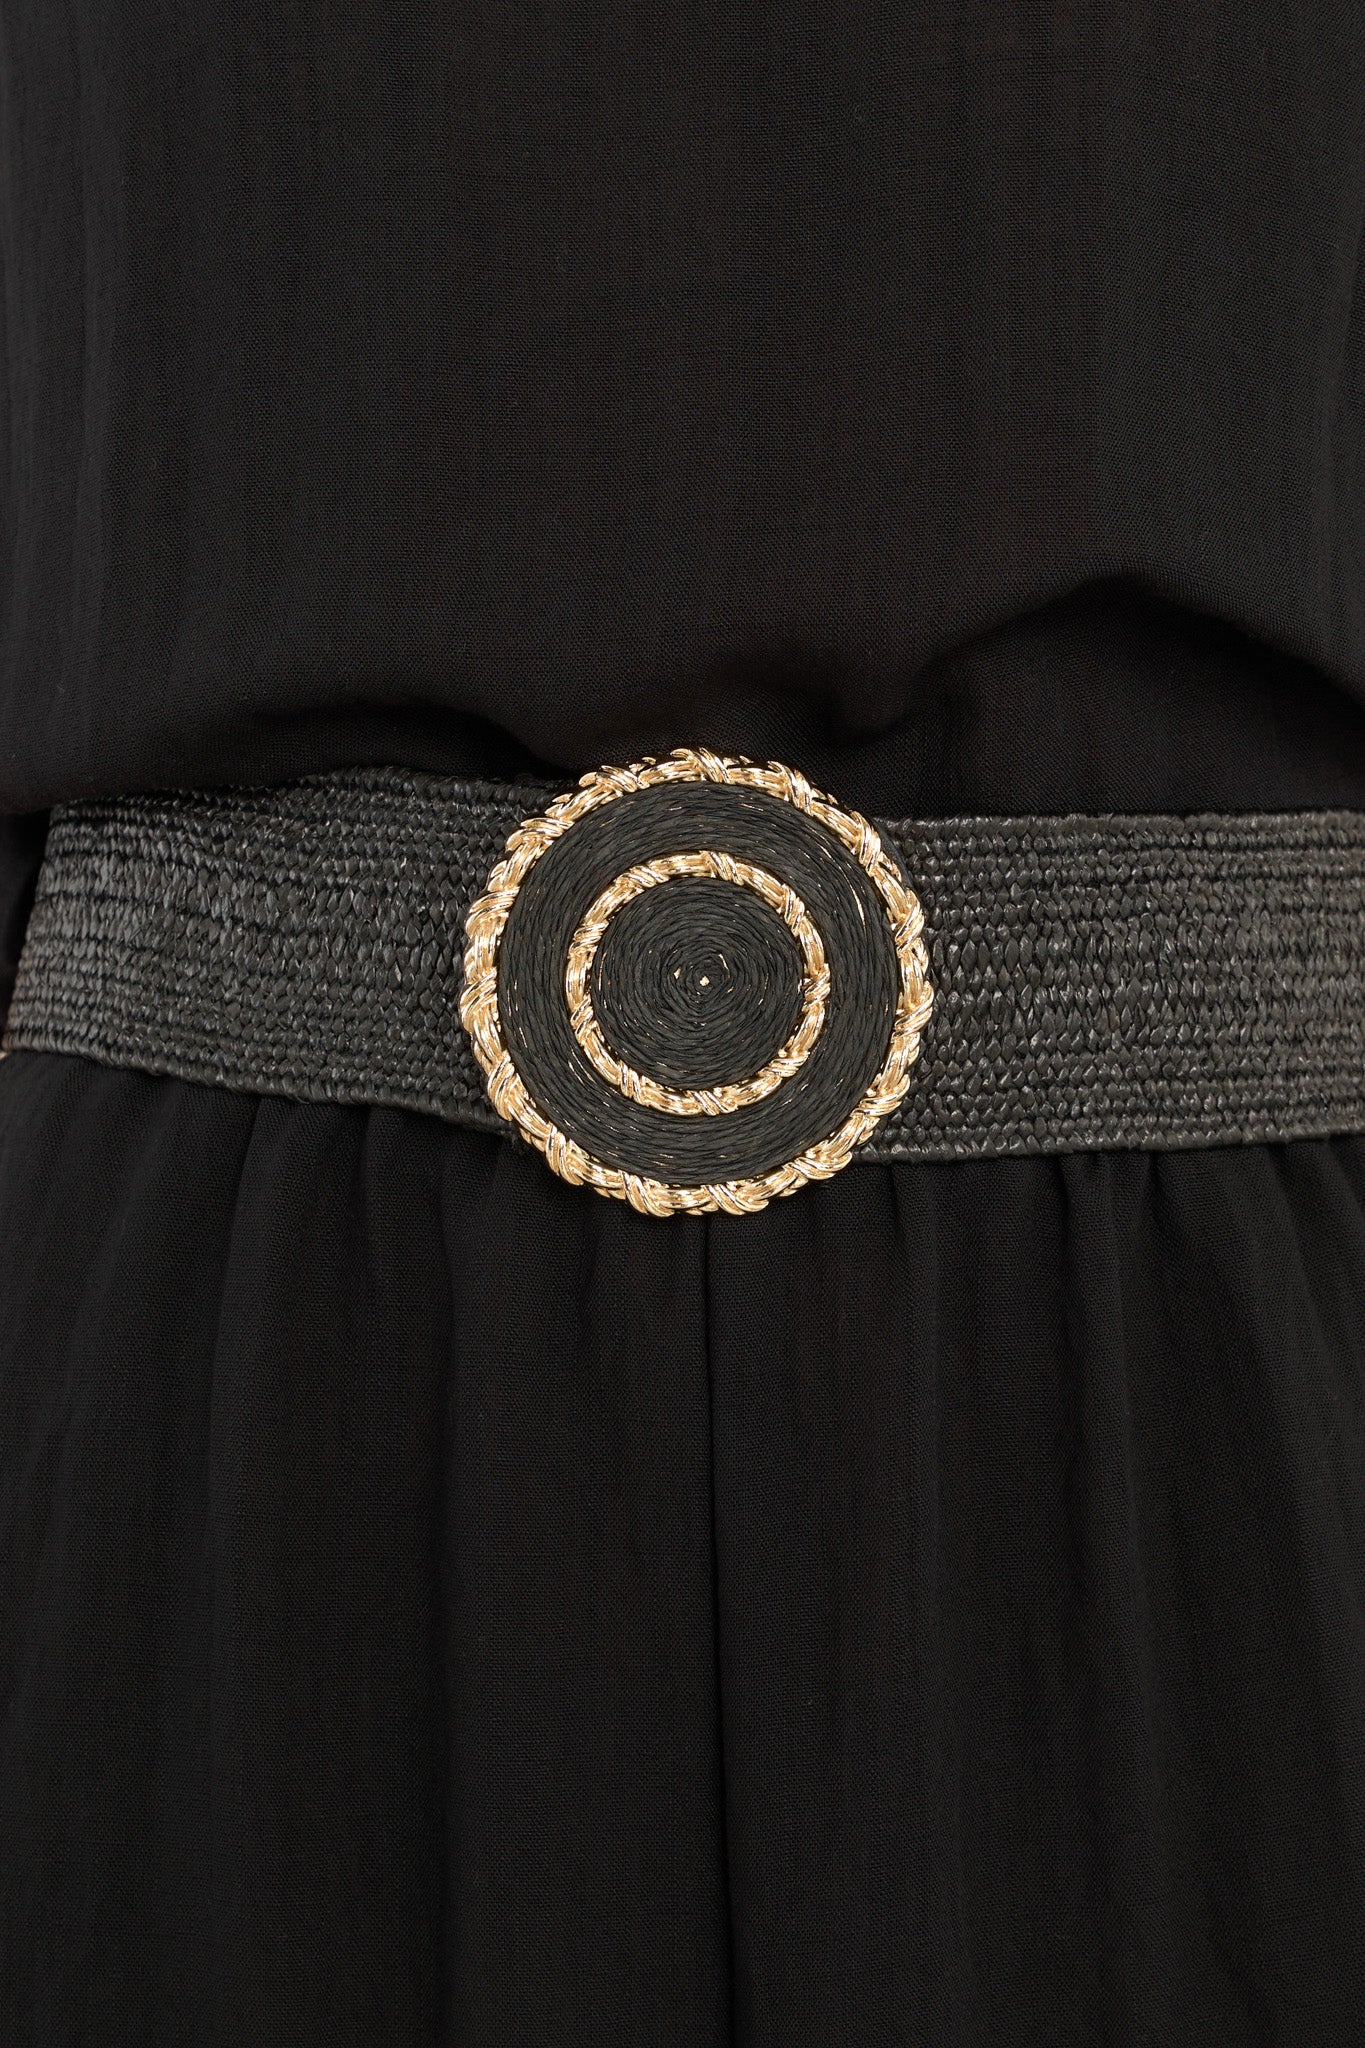 This black belt features gold hardware, an elastic band, a circular design, and a hook and bar closure.